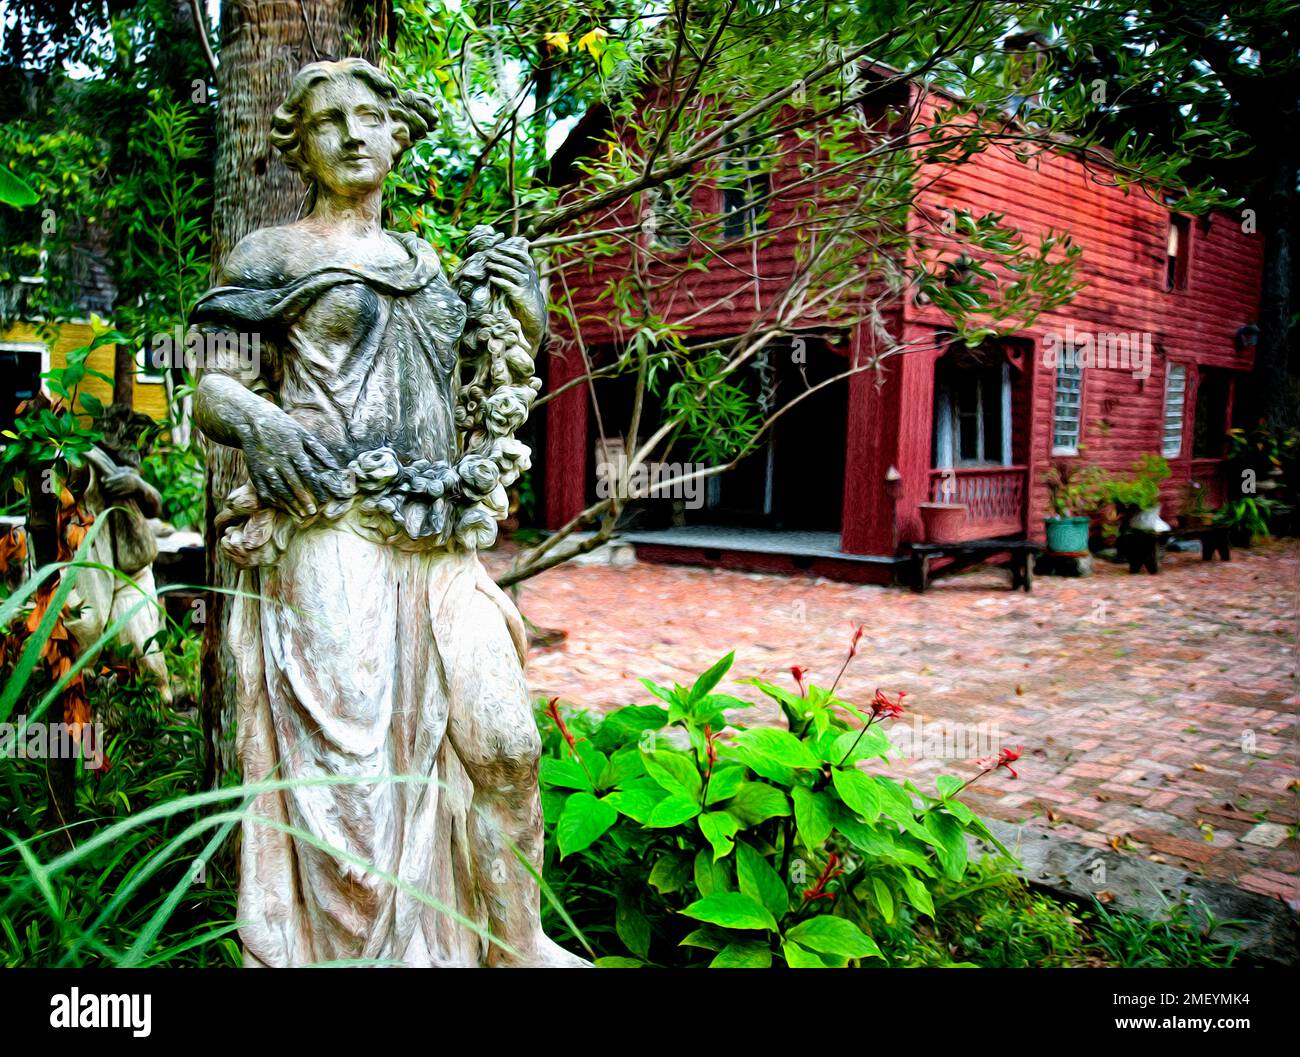 A statue in a courtyard in St. Augustine, FL Stock Photo